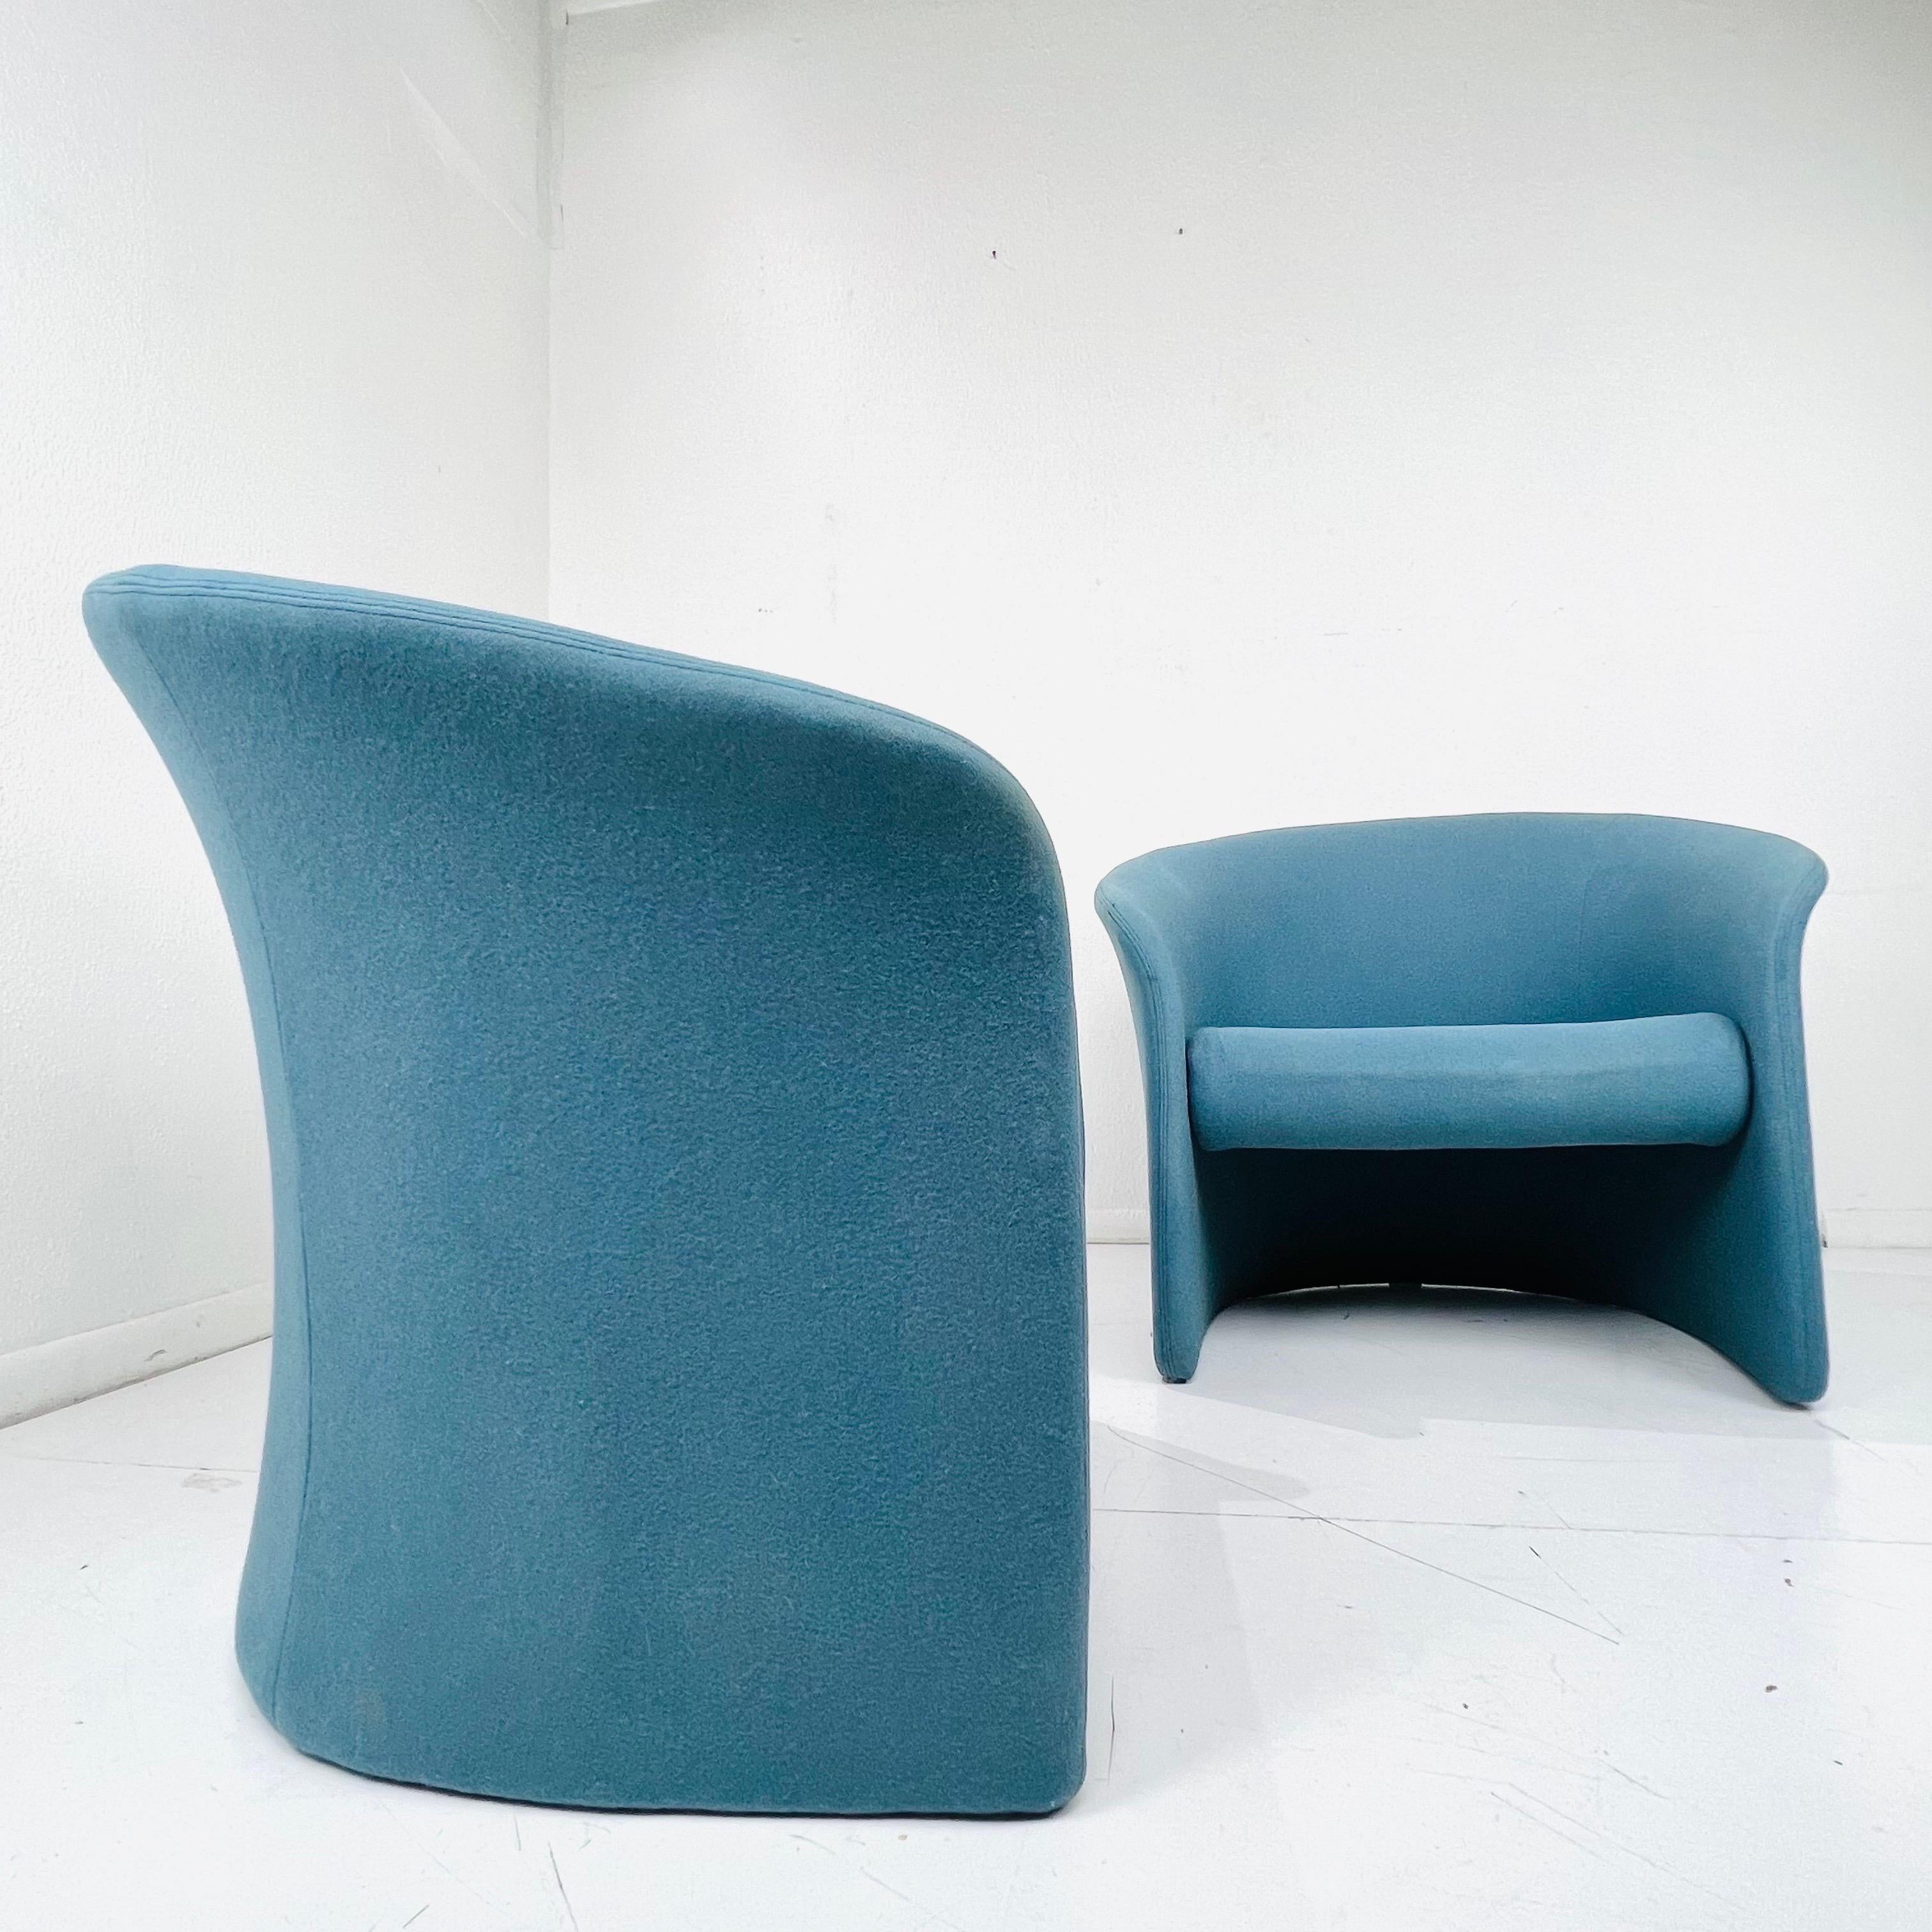 Vintage pair of postmodern Rotonda tub chairs by Massimo Vignelli for Sunar Hauserman , 1979. These feature a gently curved back and sides with floating seat fully upholstered in light blue fabric stretched over a tubular steel frame with foam